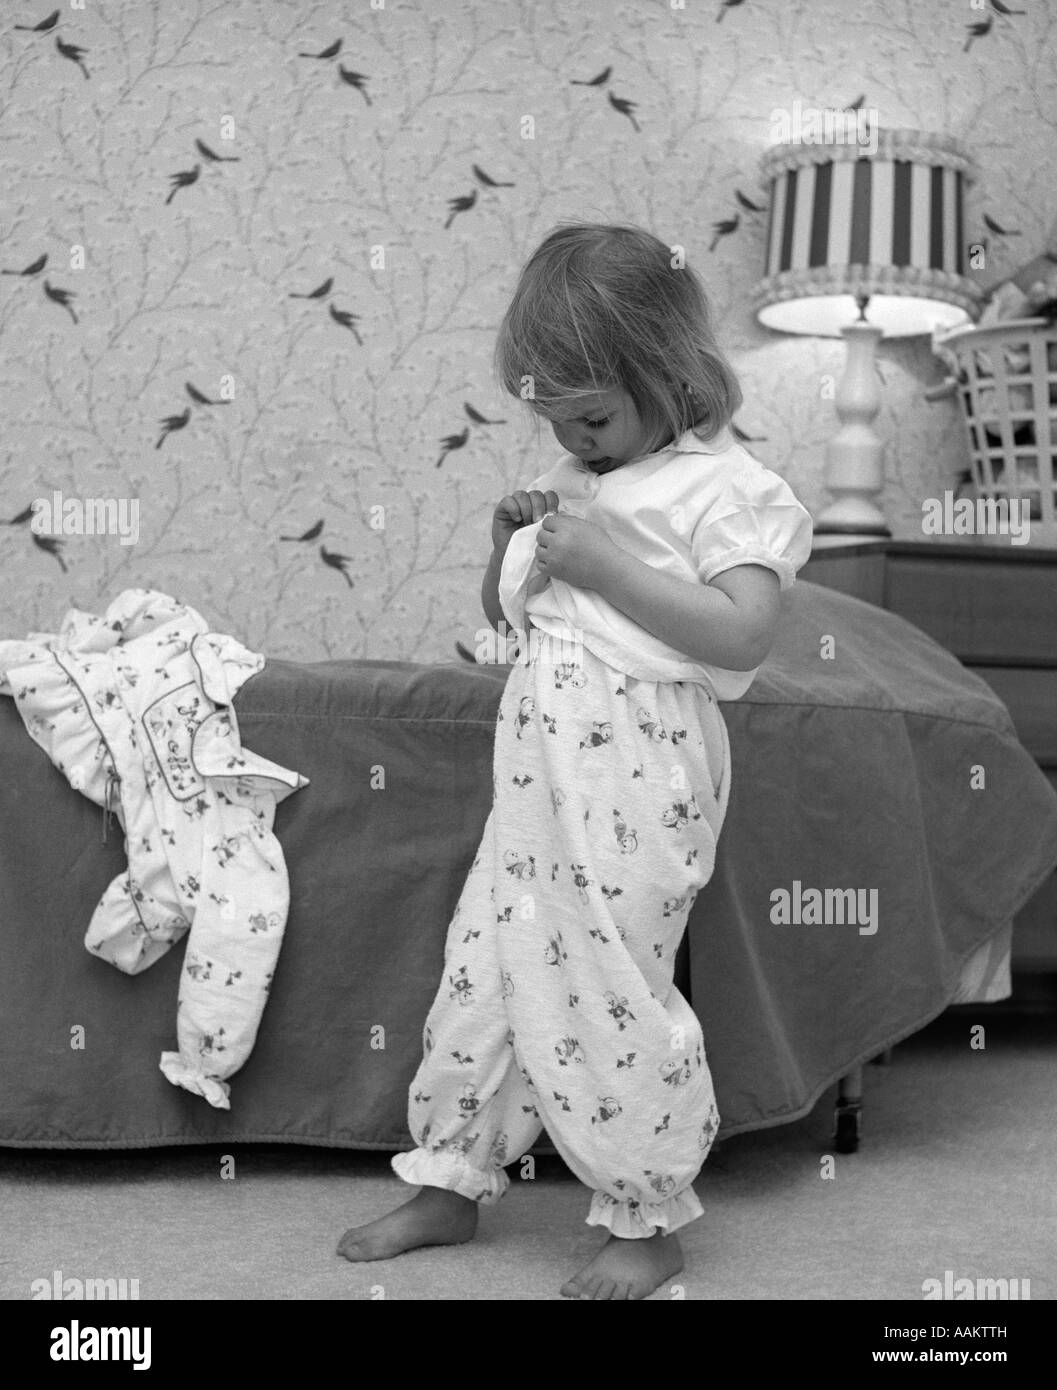 1960s BEDTIME LITTLE BLOND GIRL IN PAJAMA BOTTOMS UNBUTTONING SHIRT TO PUT ON PAJAMA TOP Stock Photo